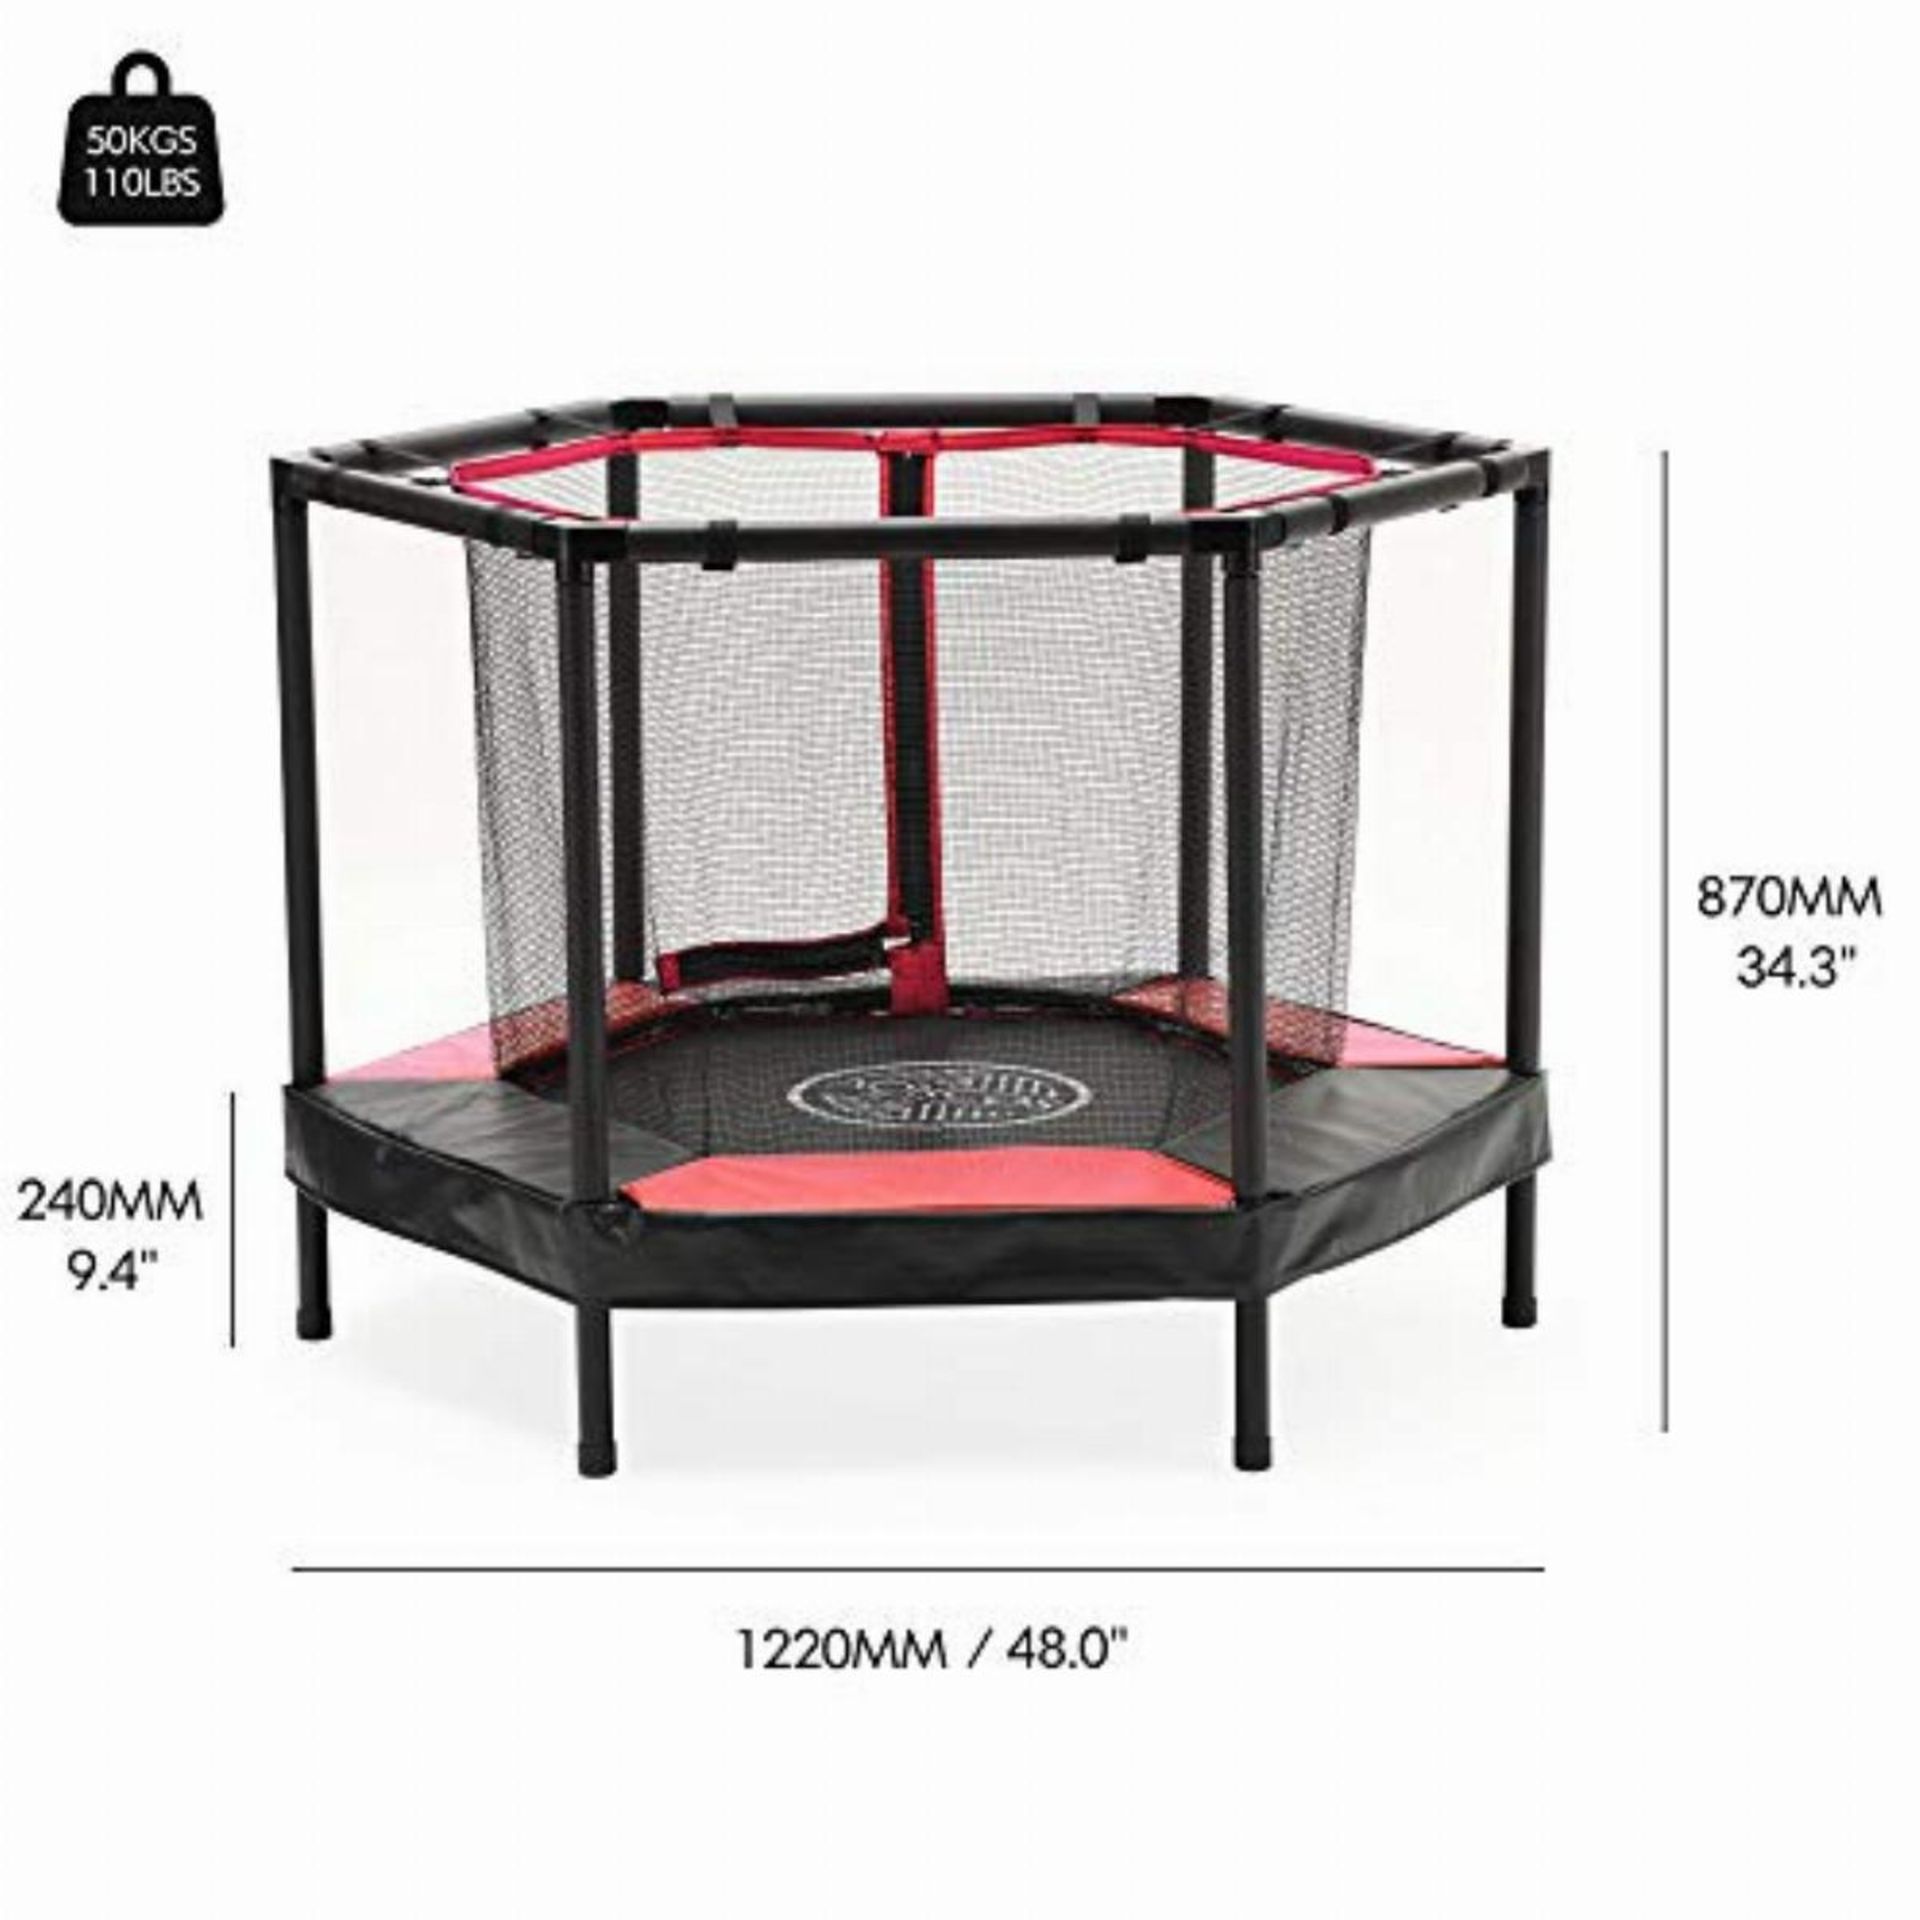 Brand new Kids Trampoline 4Ft Mini Trampolines with Enclosure Net and Safety Pad - Small Toddler - Image 2 of 2